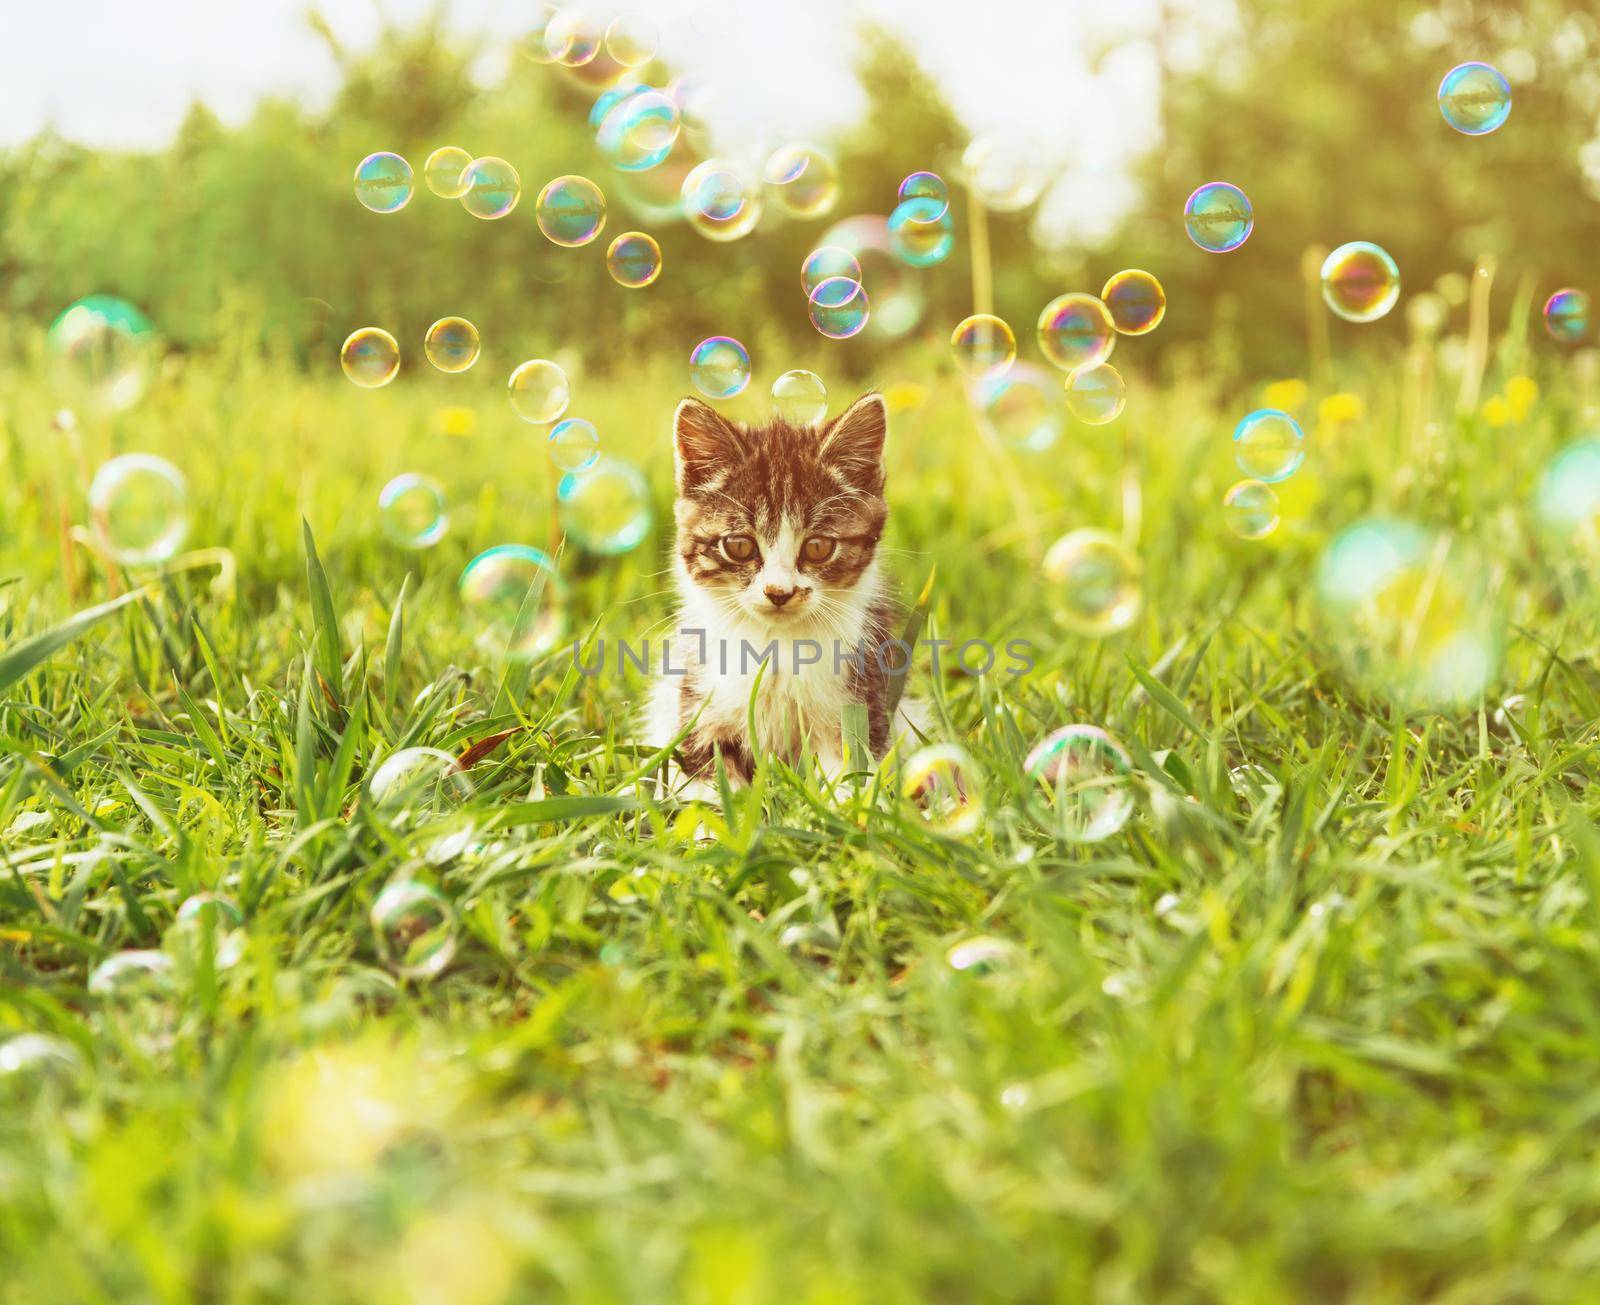 Little kitten sitting among soap bubbles on summer meadow. Image with sunlight effect